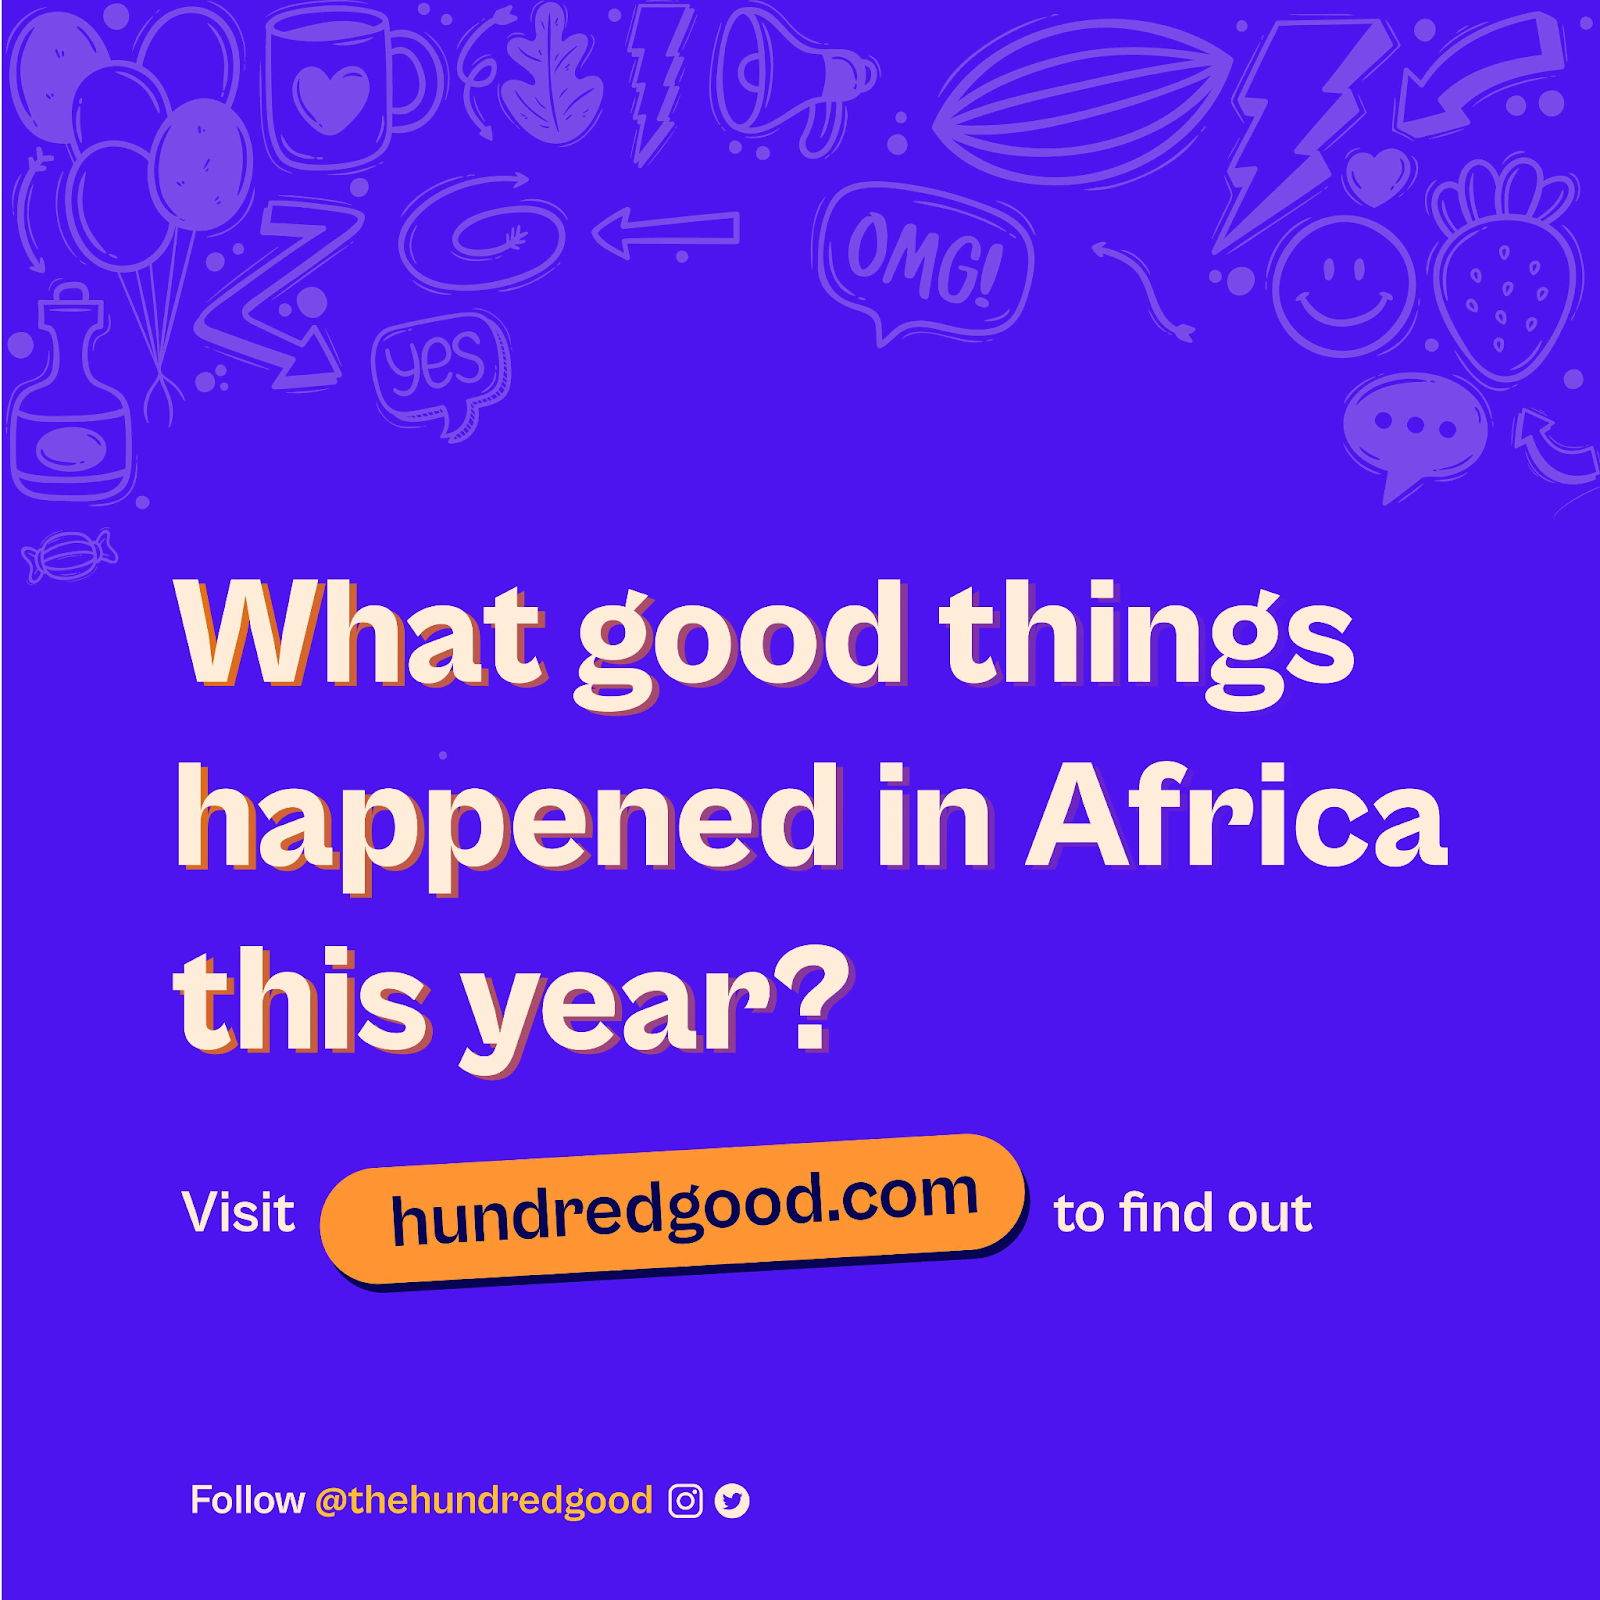 What good things happened in Africa this year? Visit hundredgood.com to find out.